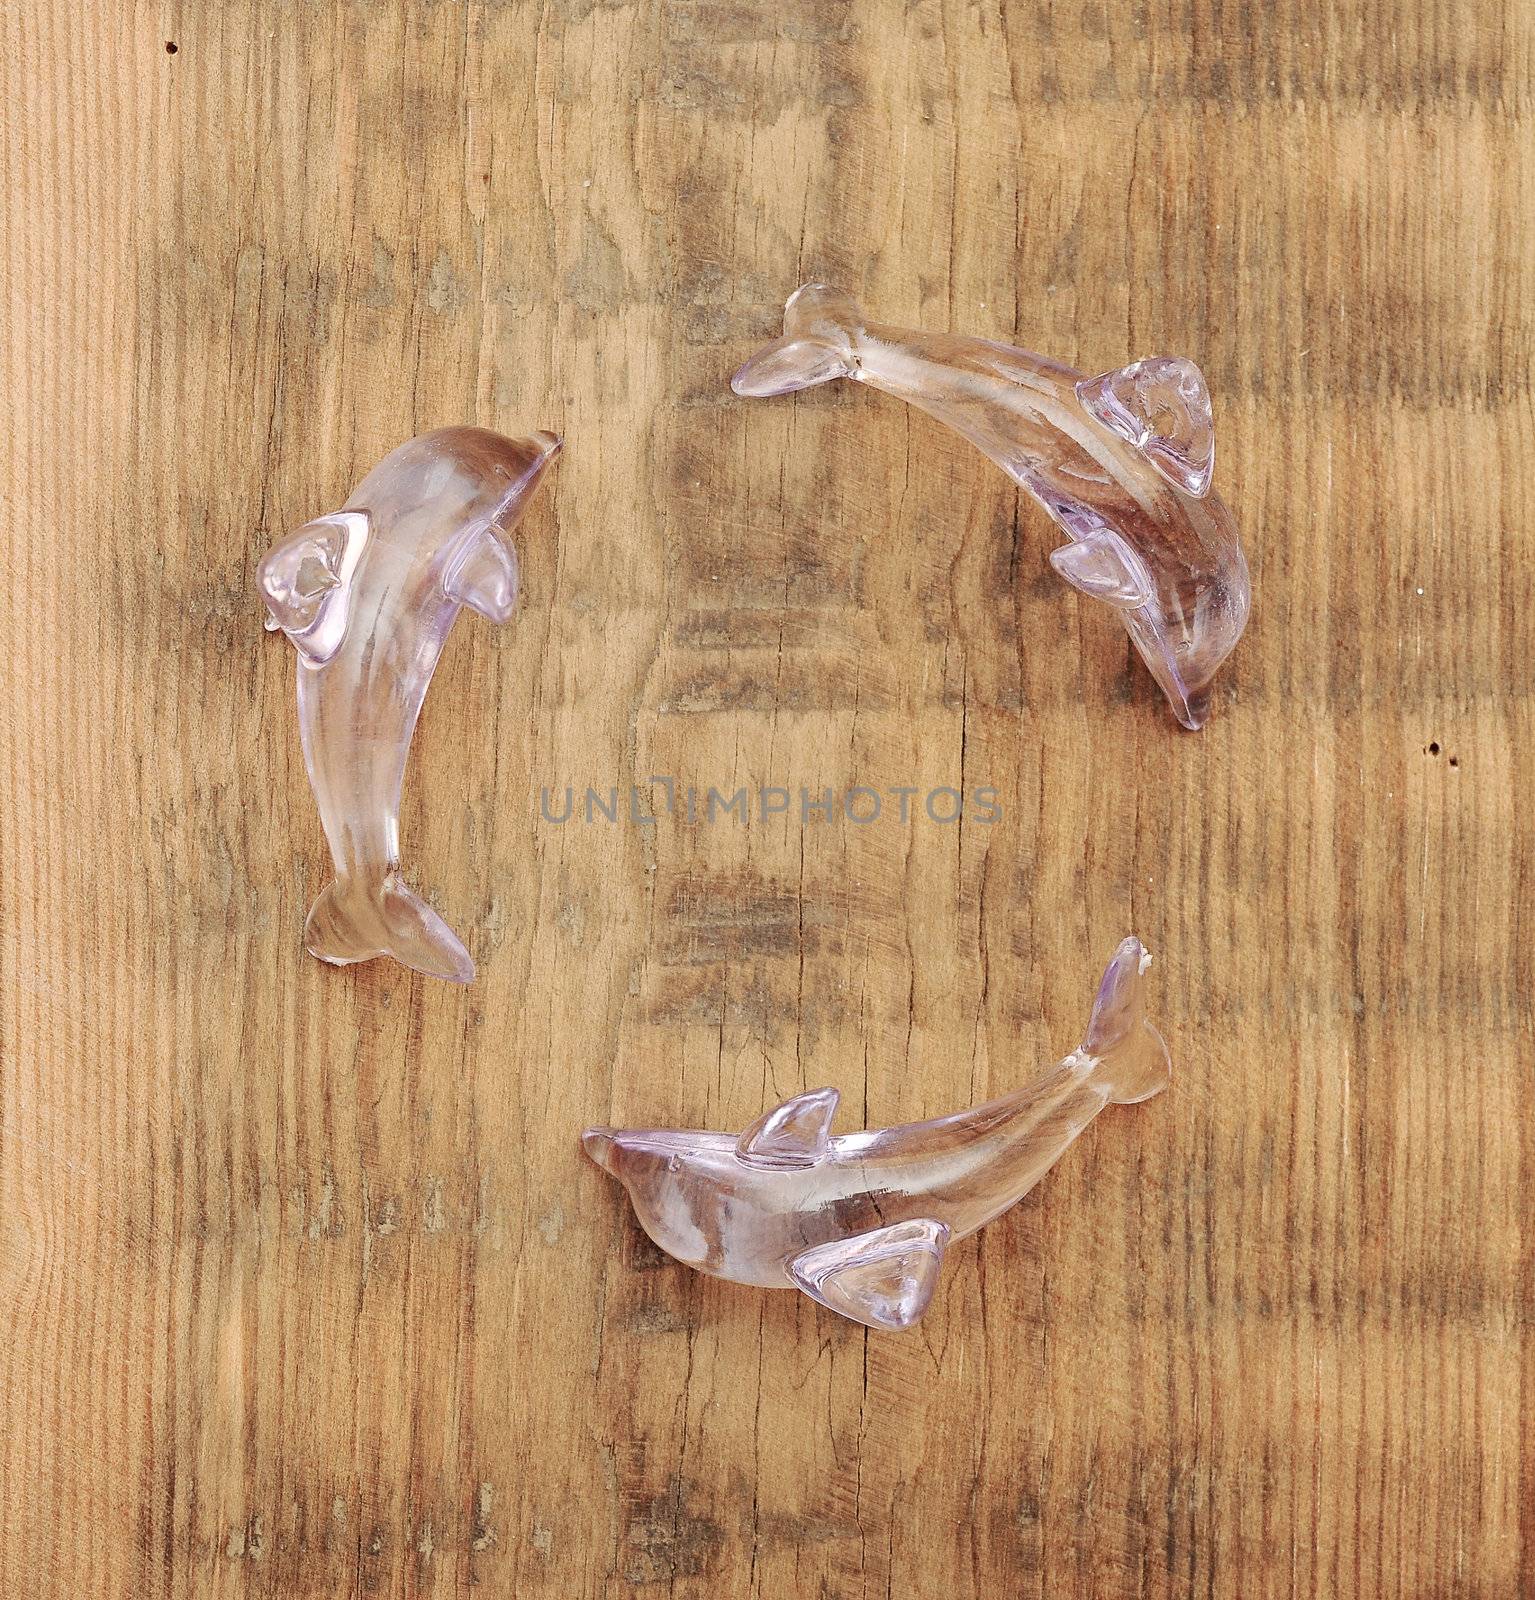 recycling symbol made crystal transparent dolphins sculpture with space for your text